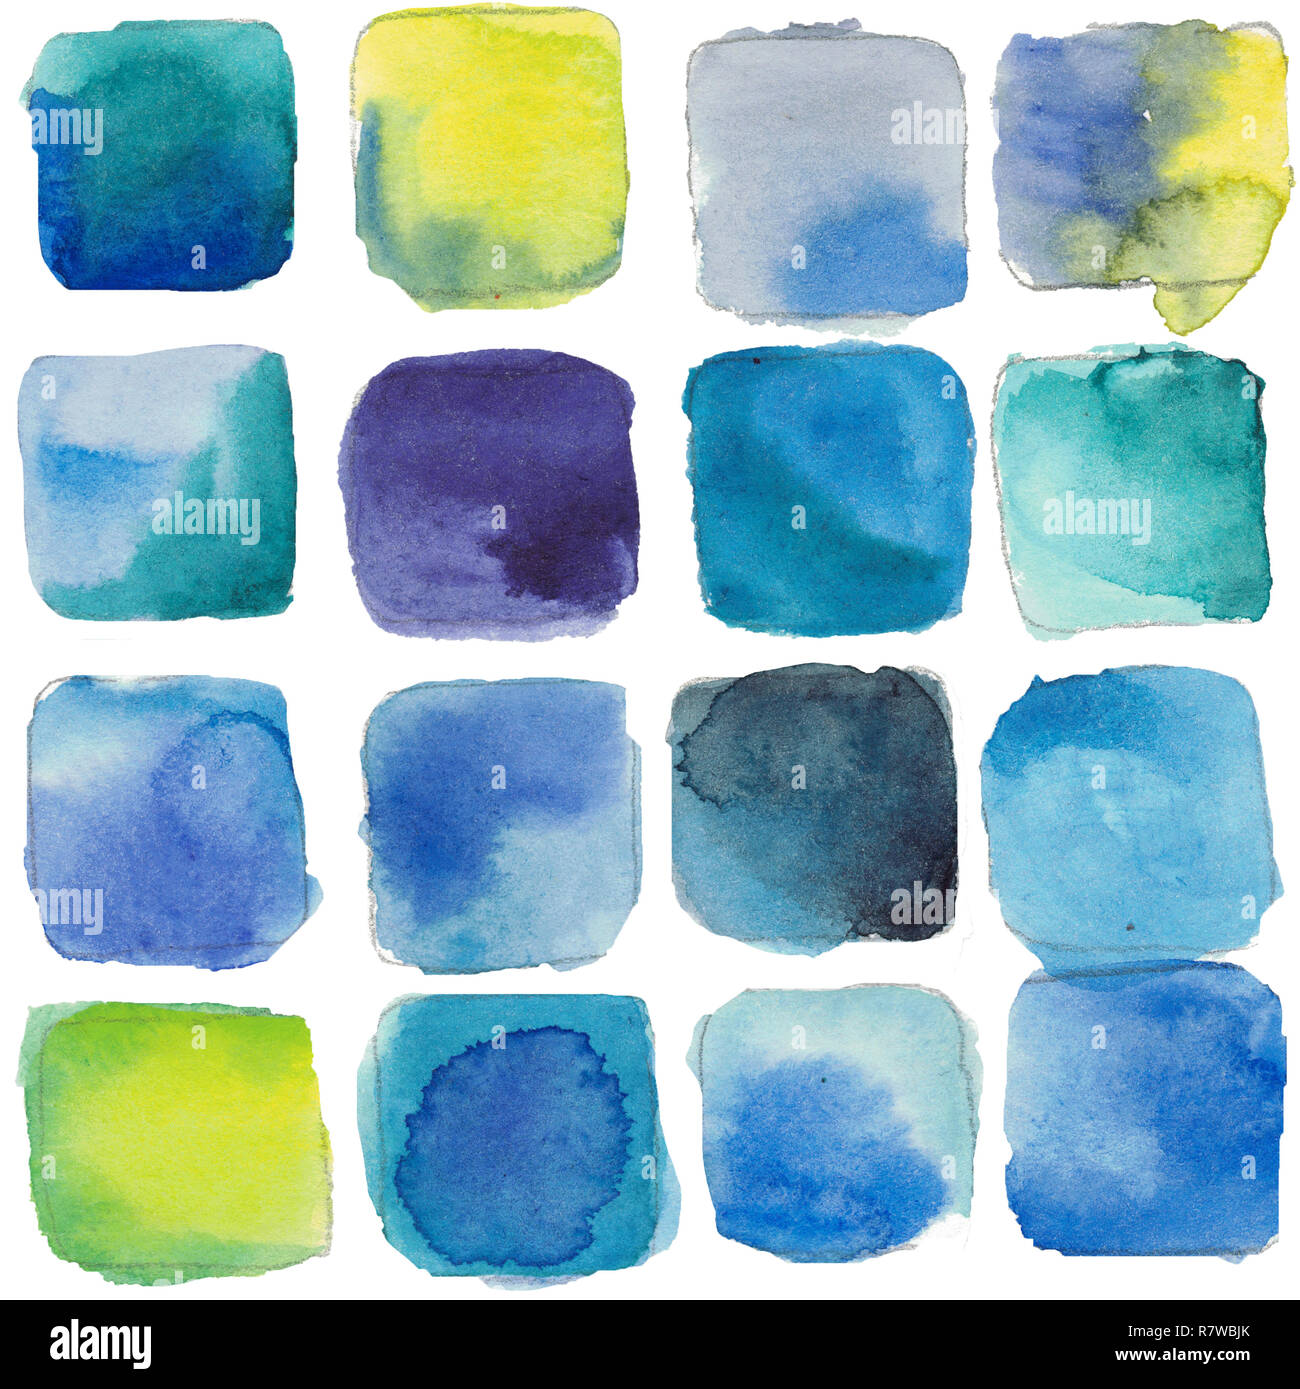 Watercolor hand drawn seamless pattern of abstract ice cubes, good for winter backgrounds. Stock Photo